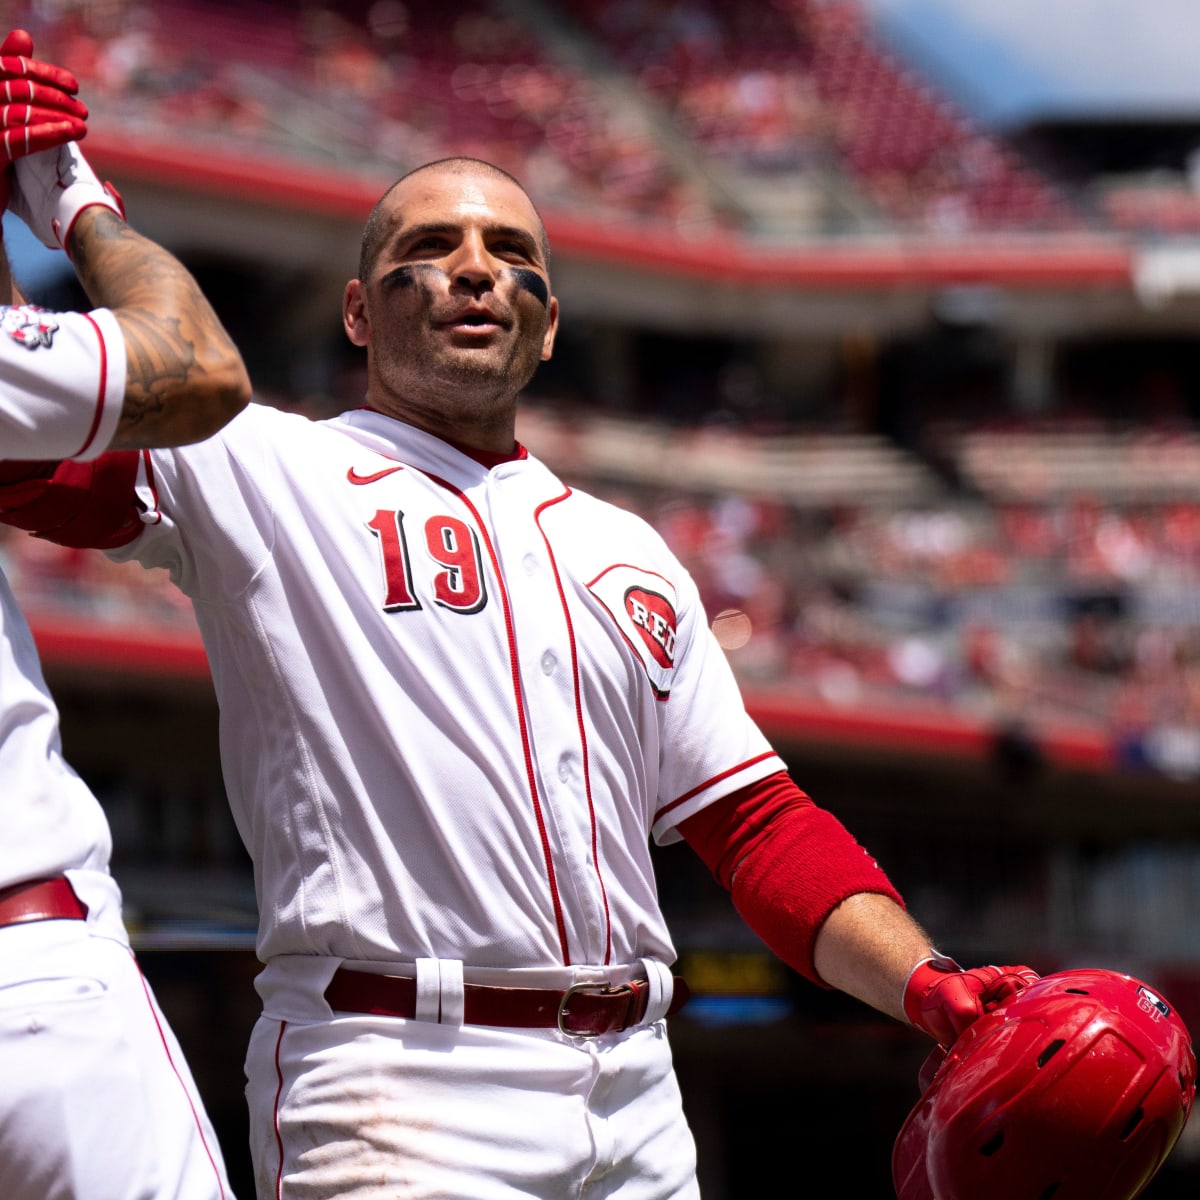 Cincinnati Reds fans must face reality: Joey Votto may never be same